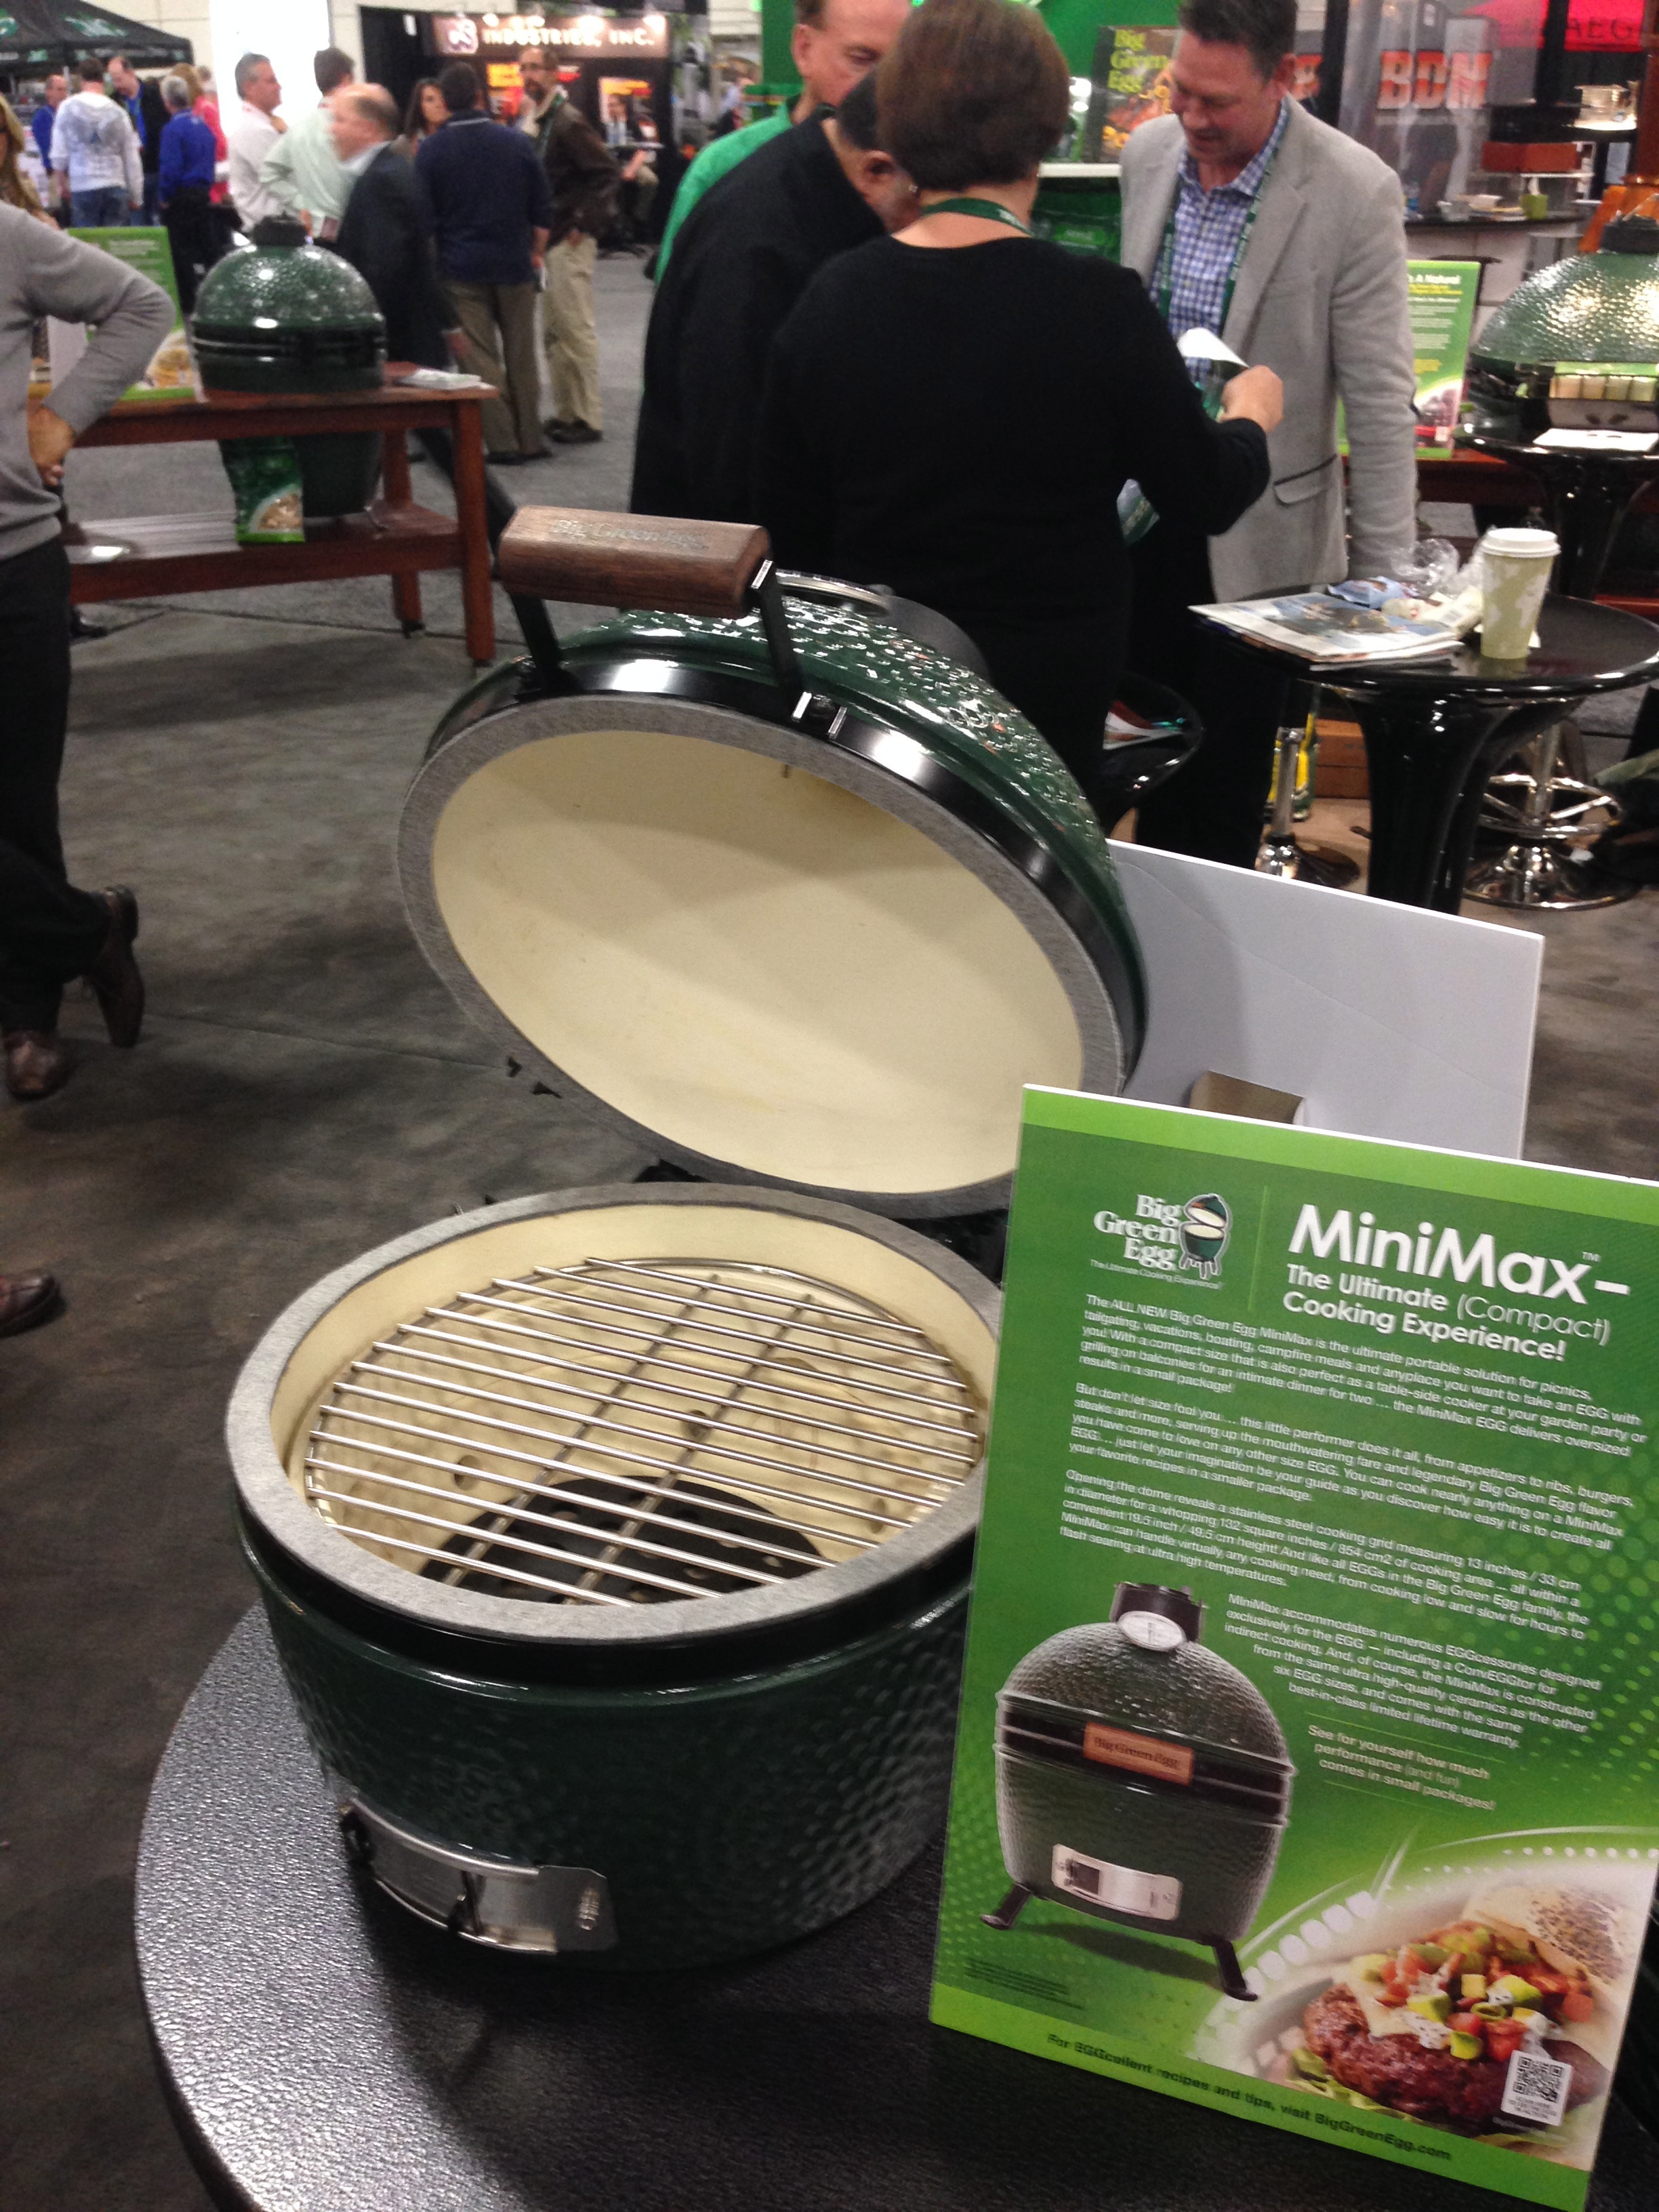 Big Green Egg Introduces New Mini Max Portable Grill,Types Of Ducks To Hunt